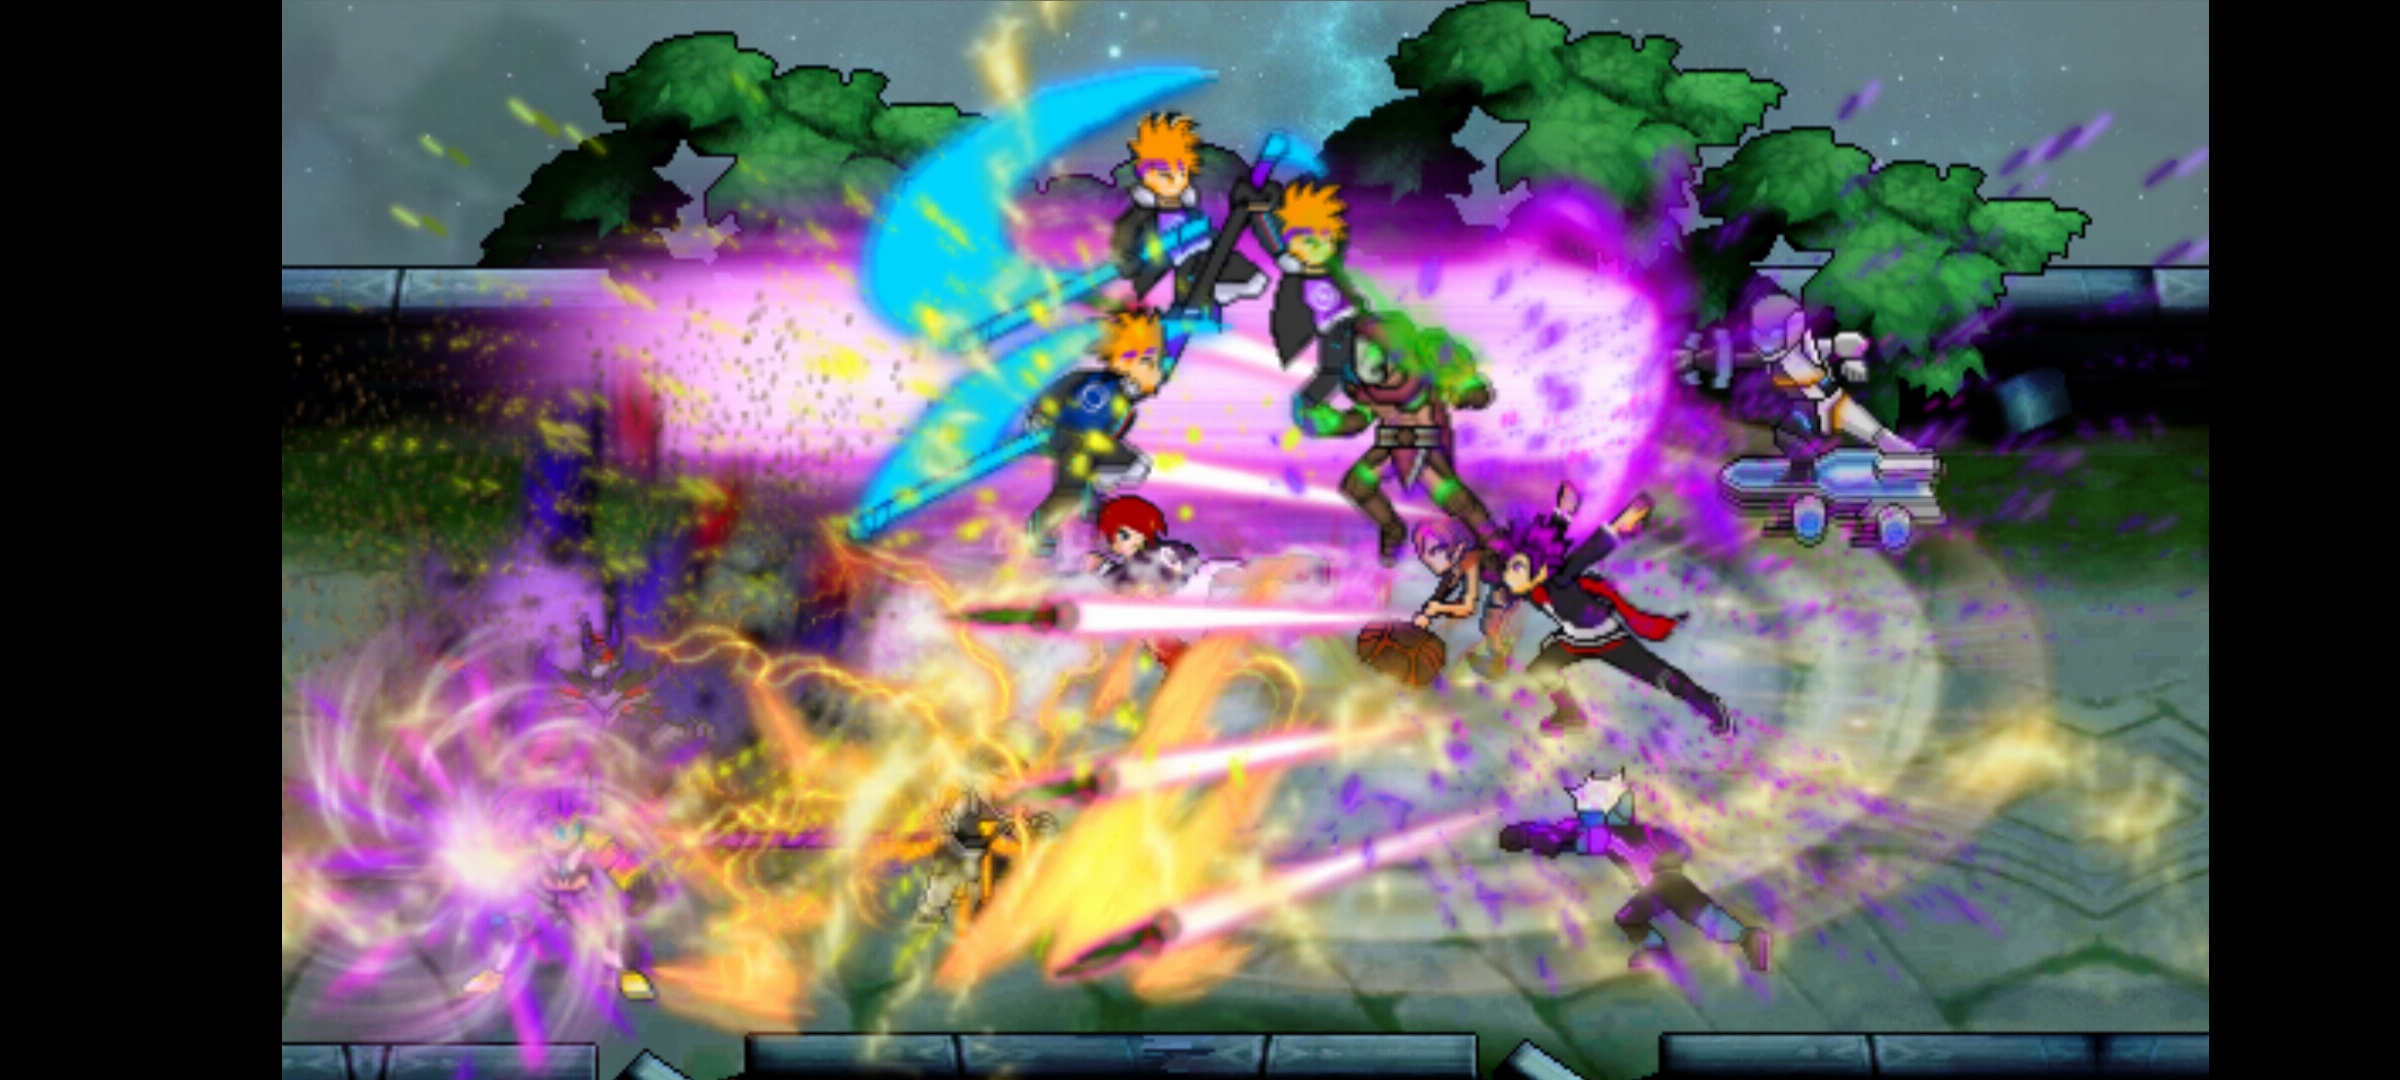 Moba Mugen Apk Download Free For Android [Latest]